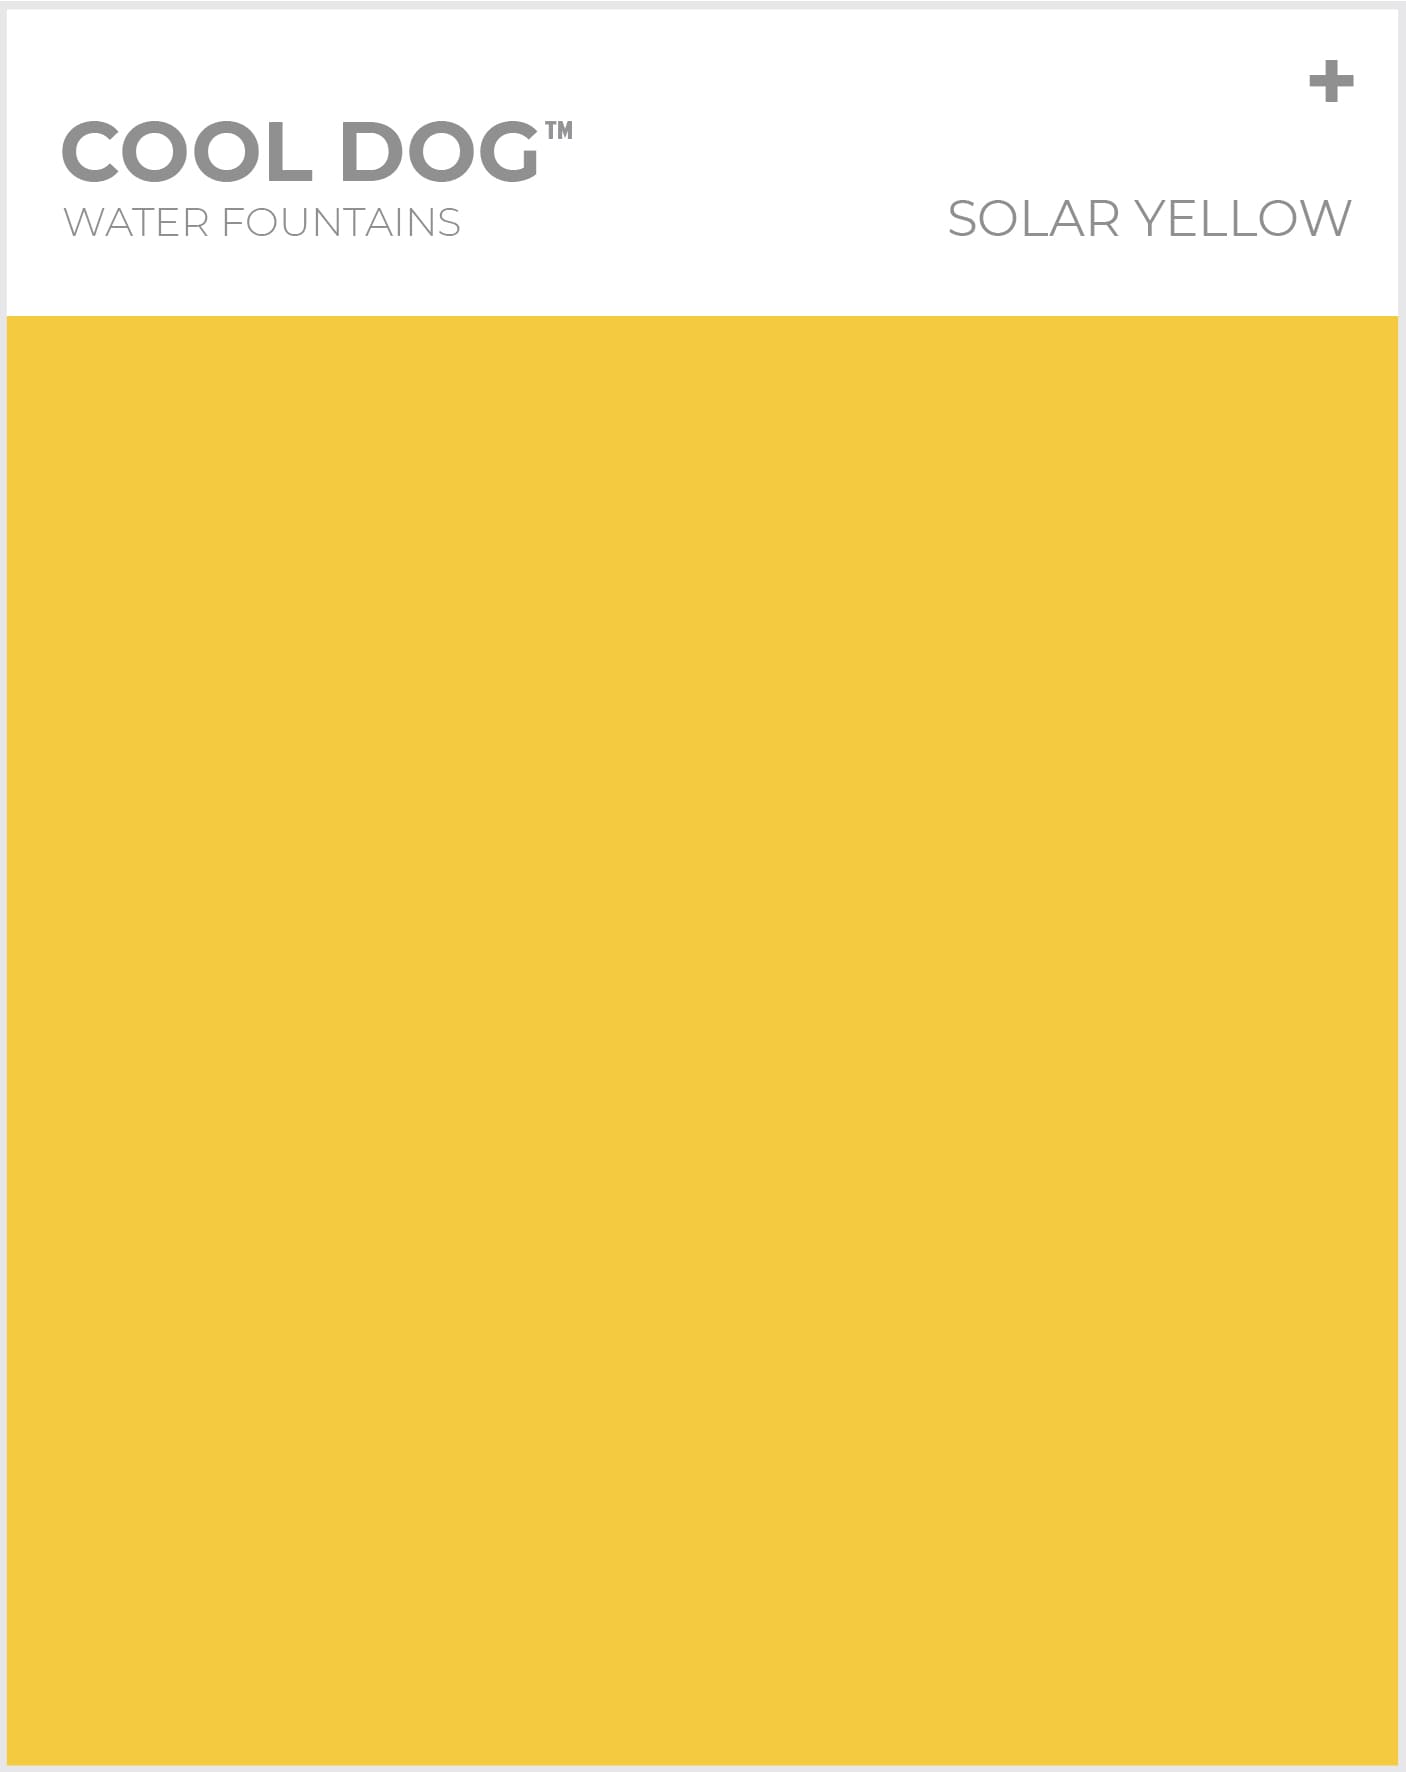 Cool Dog Water Fountains - Solar Yellow